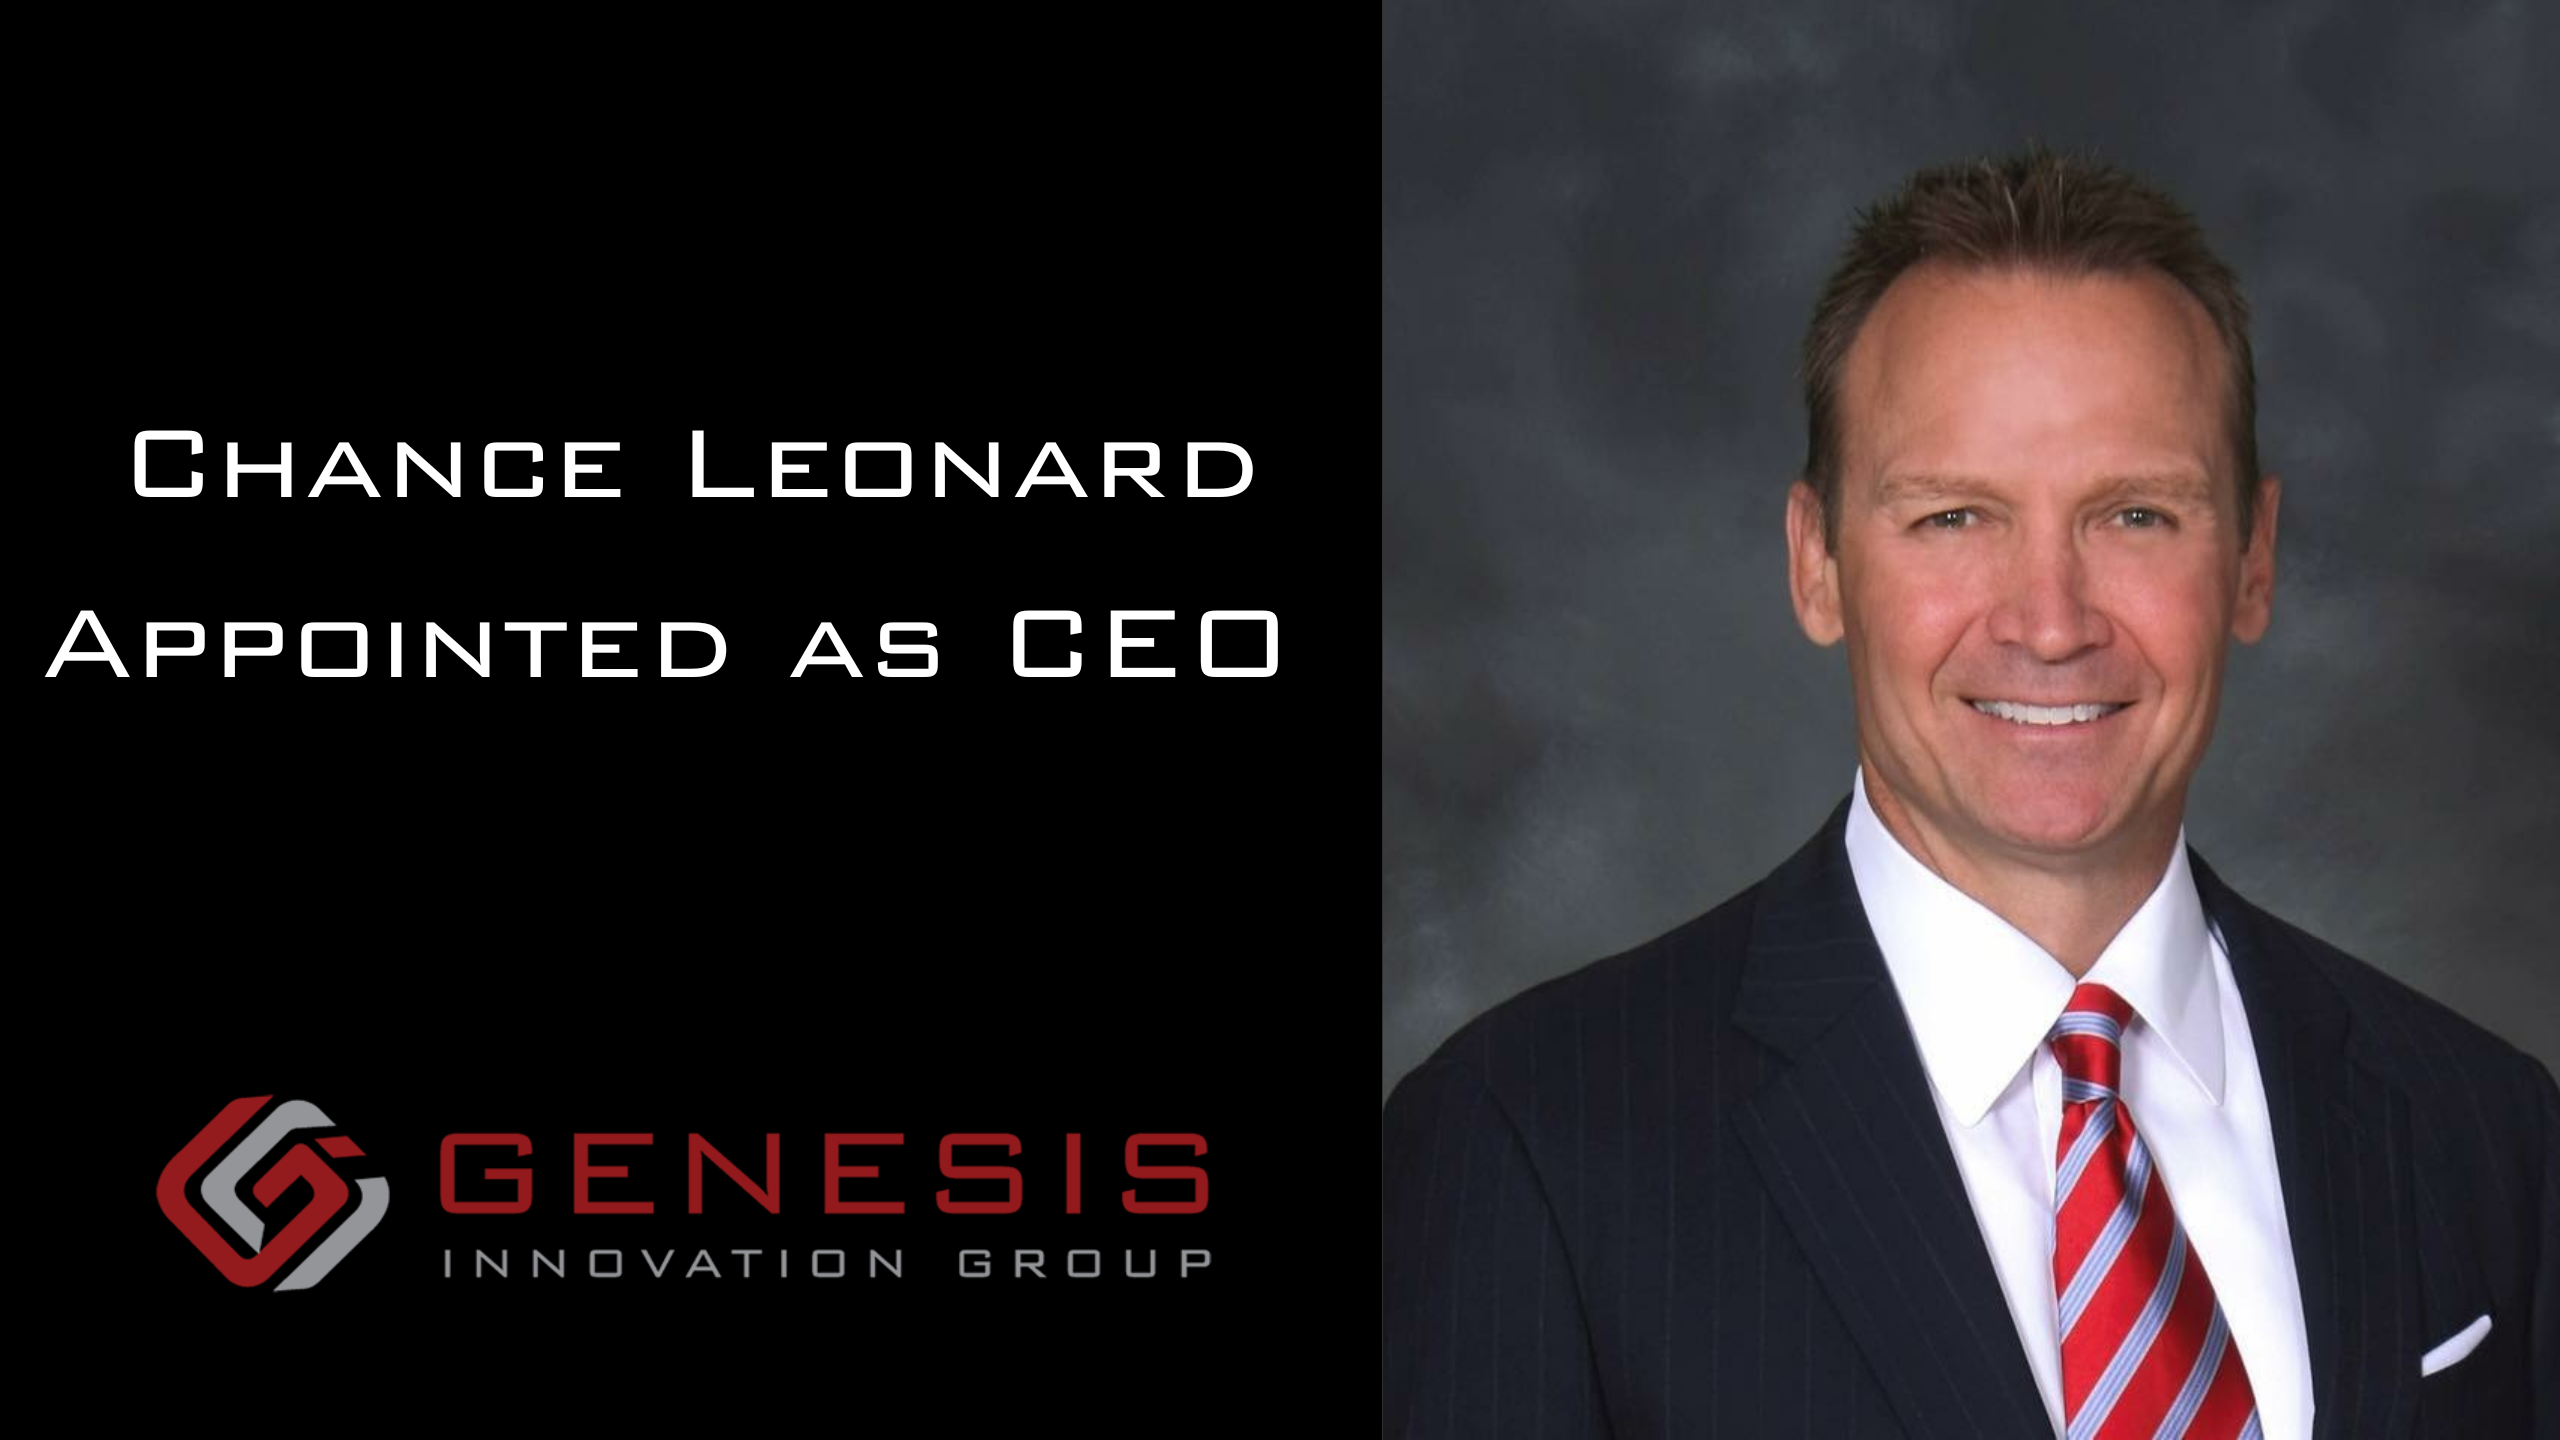 Chance Leonard appointed as CEO for Genesis Innovation Group News press release